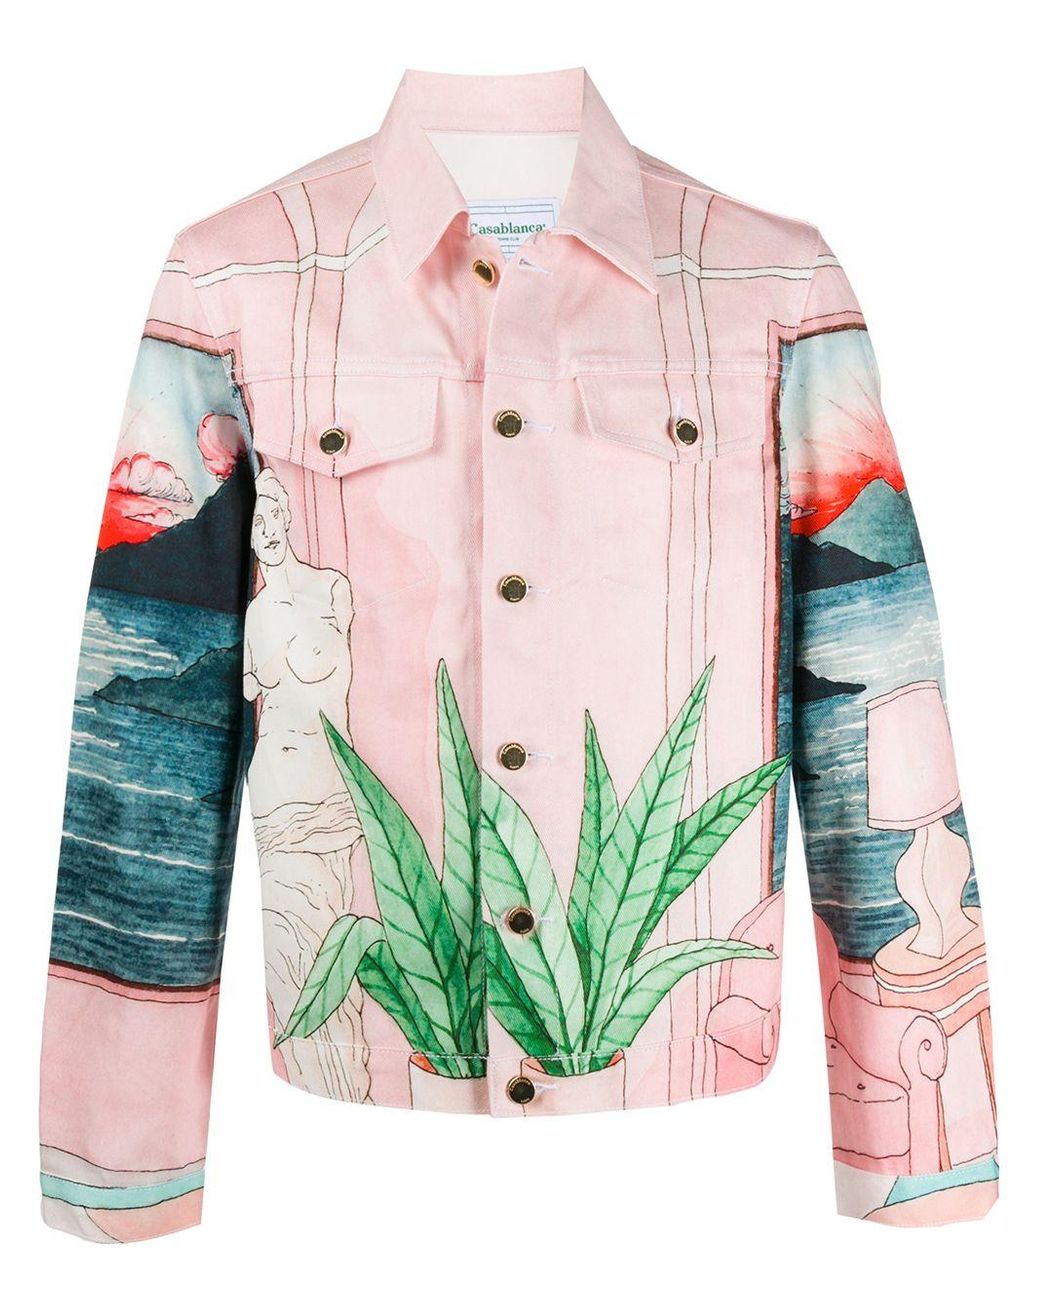 Painted Denim Jacket Projects  Photos videos logos illustrations and  branding on Behance